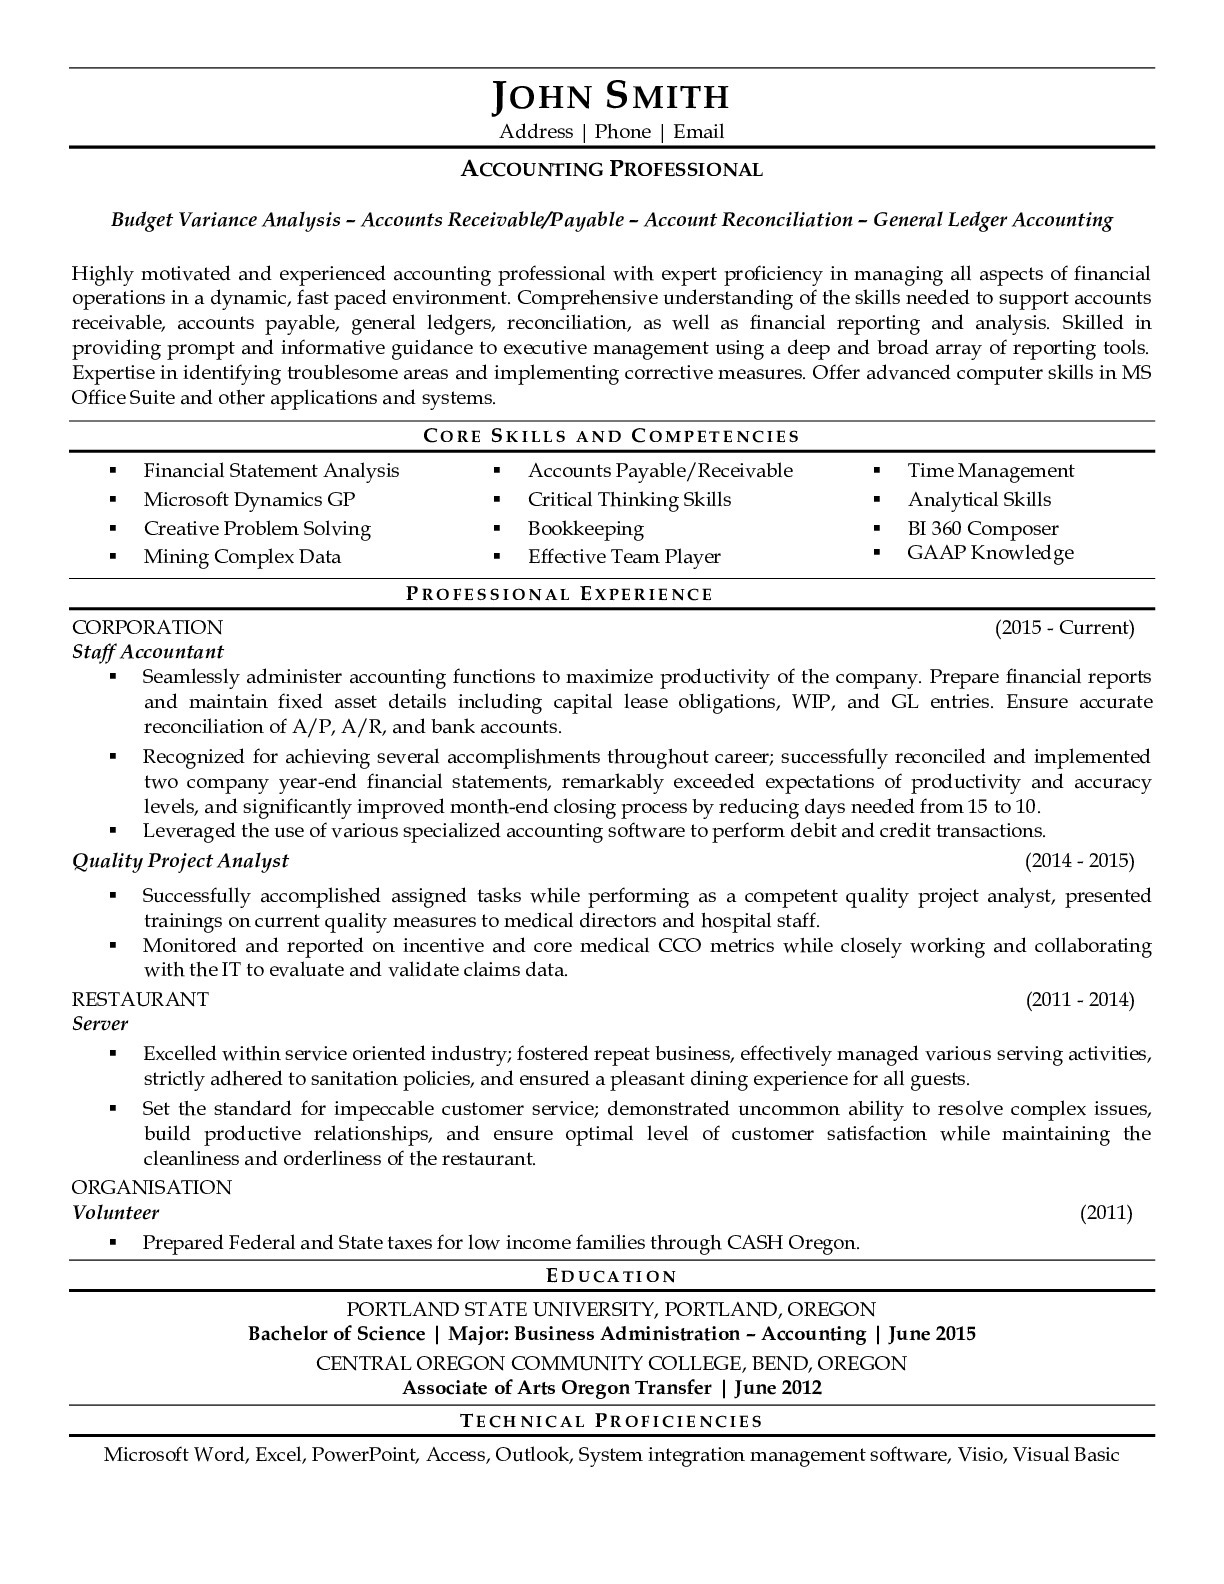 Accountant Resume Example & Sample | ResumeGets.com